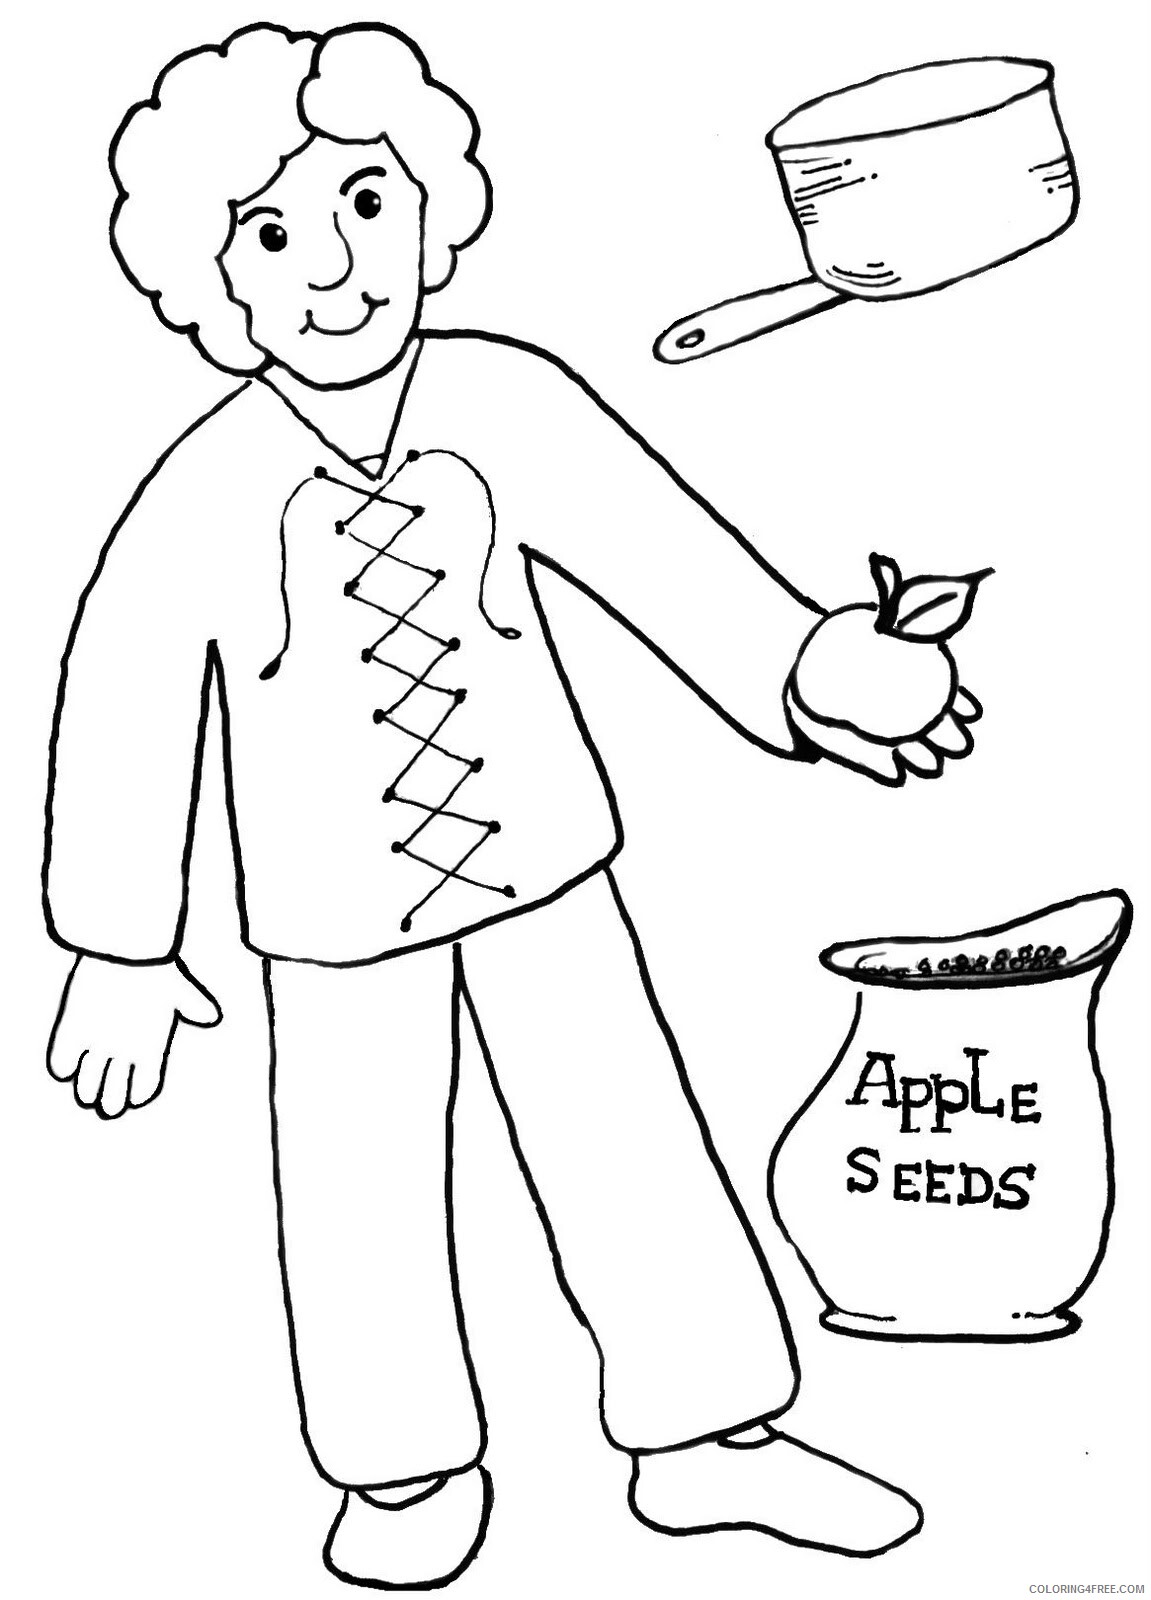 Johnny Appleseed Coloring Pages Free Johnny Appleseed Printable 2021 3608 Coloring4free